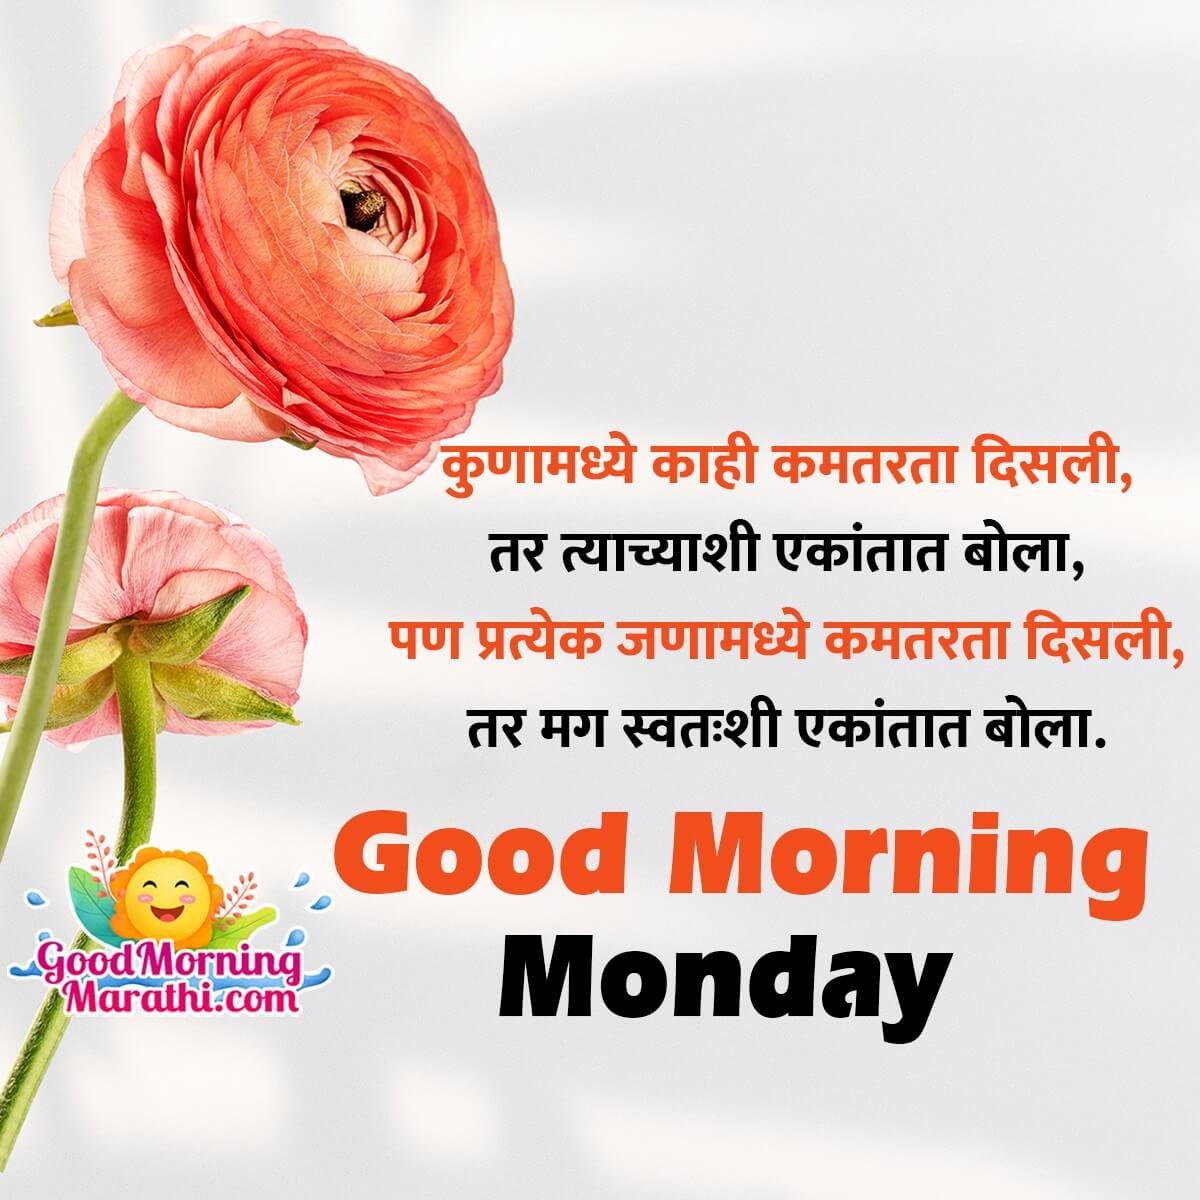 Astonishing Collection of 4K Good Morning in Marathi Images: Over 999+ Exquisite Photos